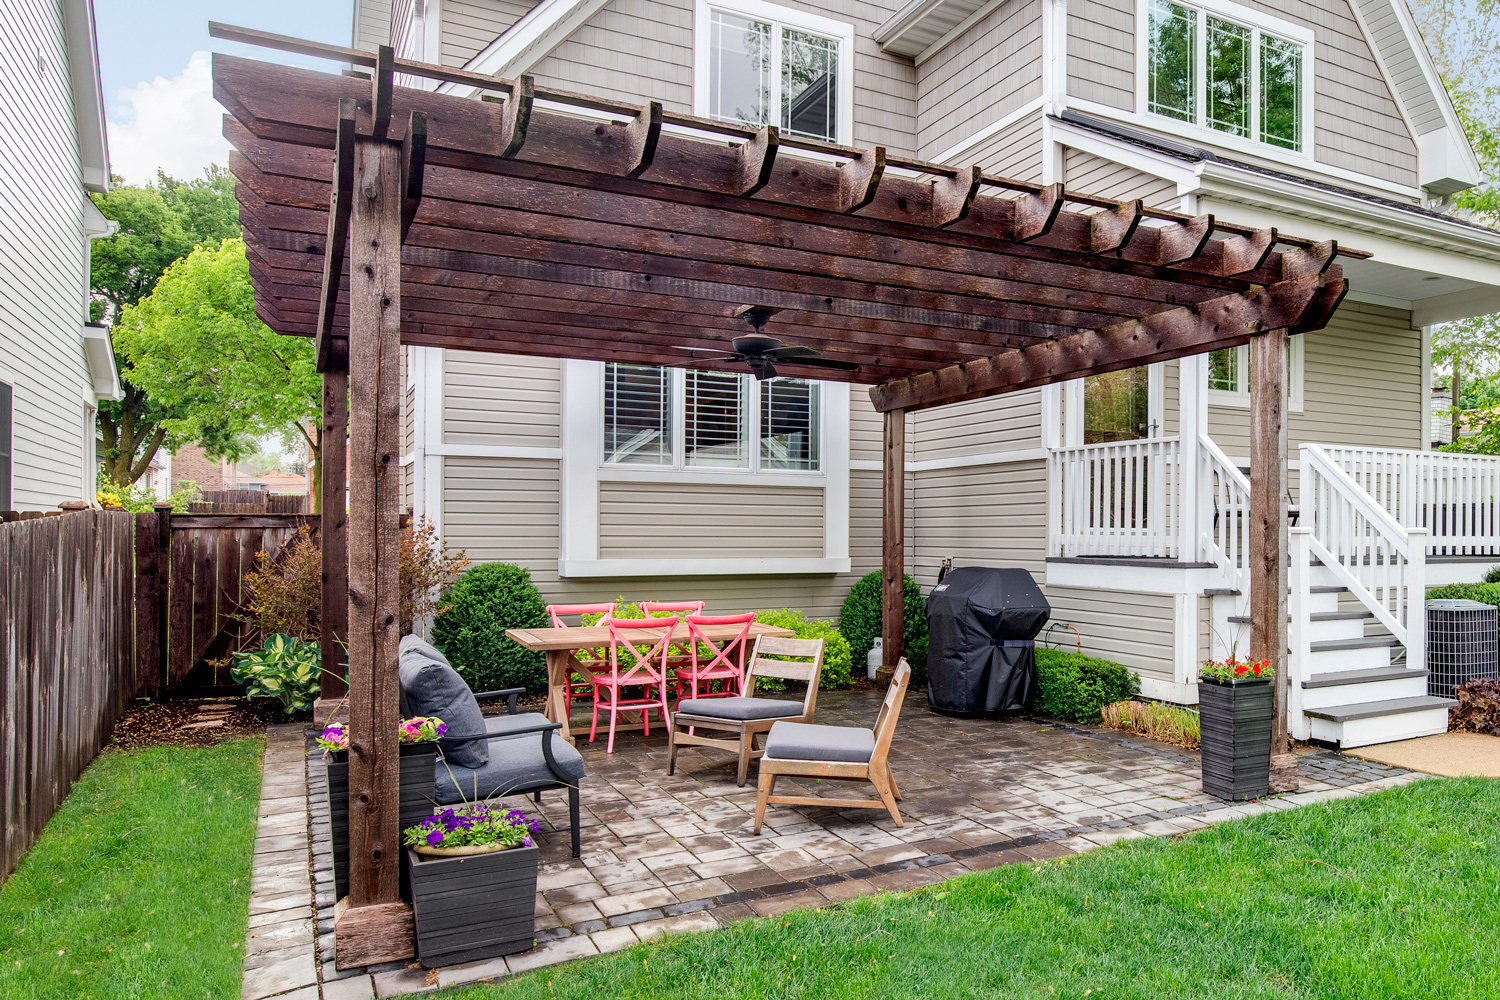 Wooden pergola in front of residential house.